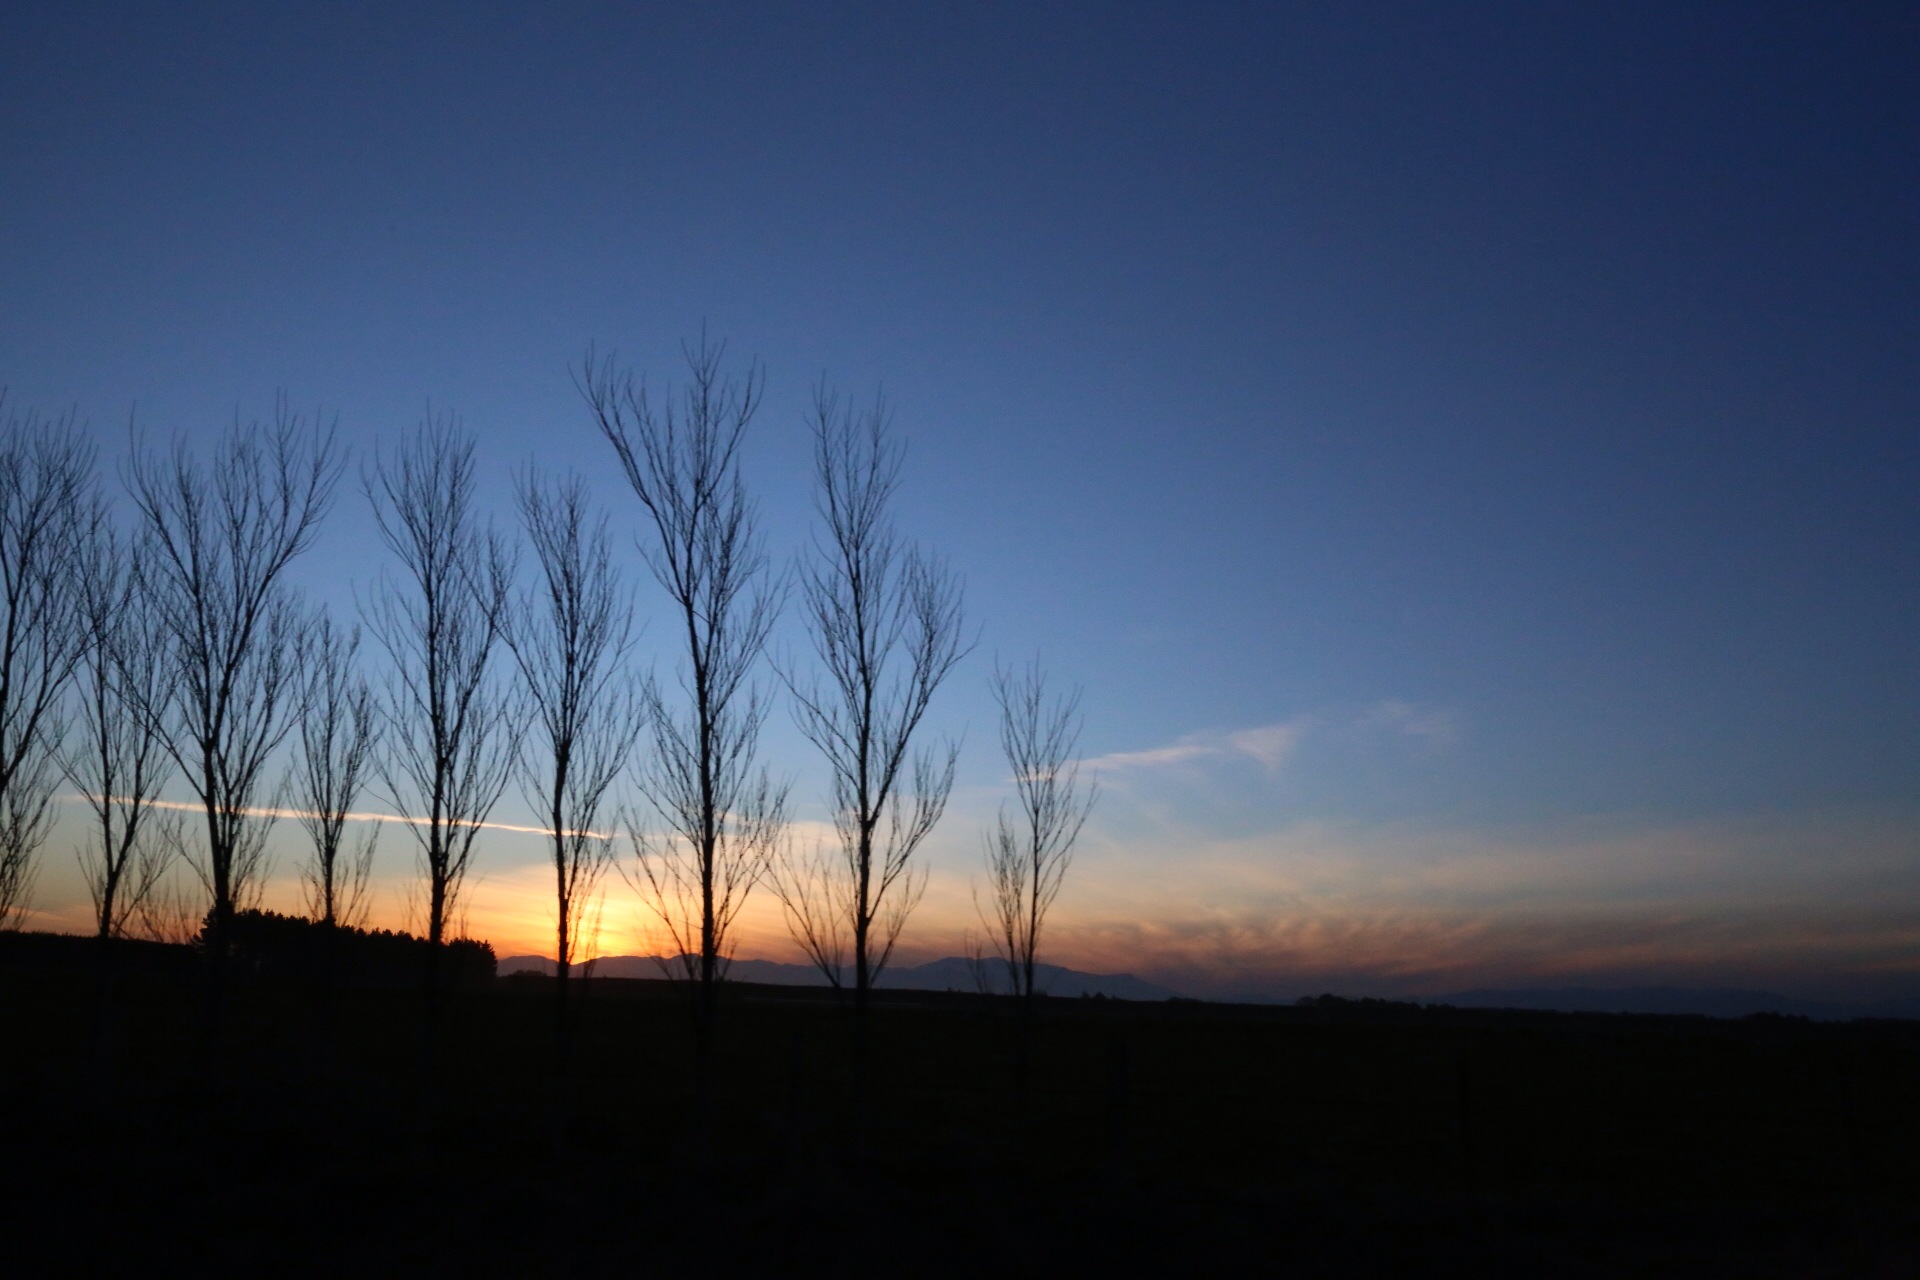 the sunset is seen behind trees in the distance